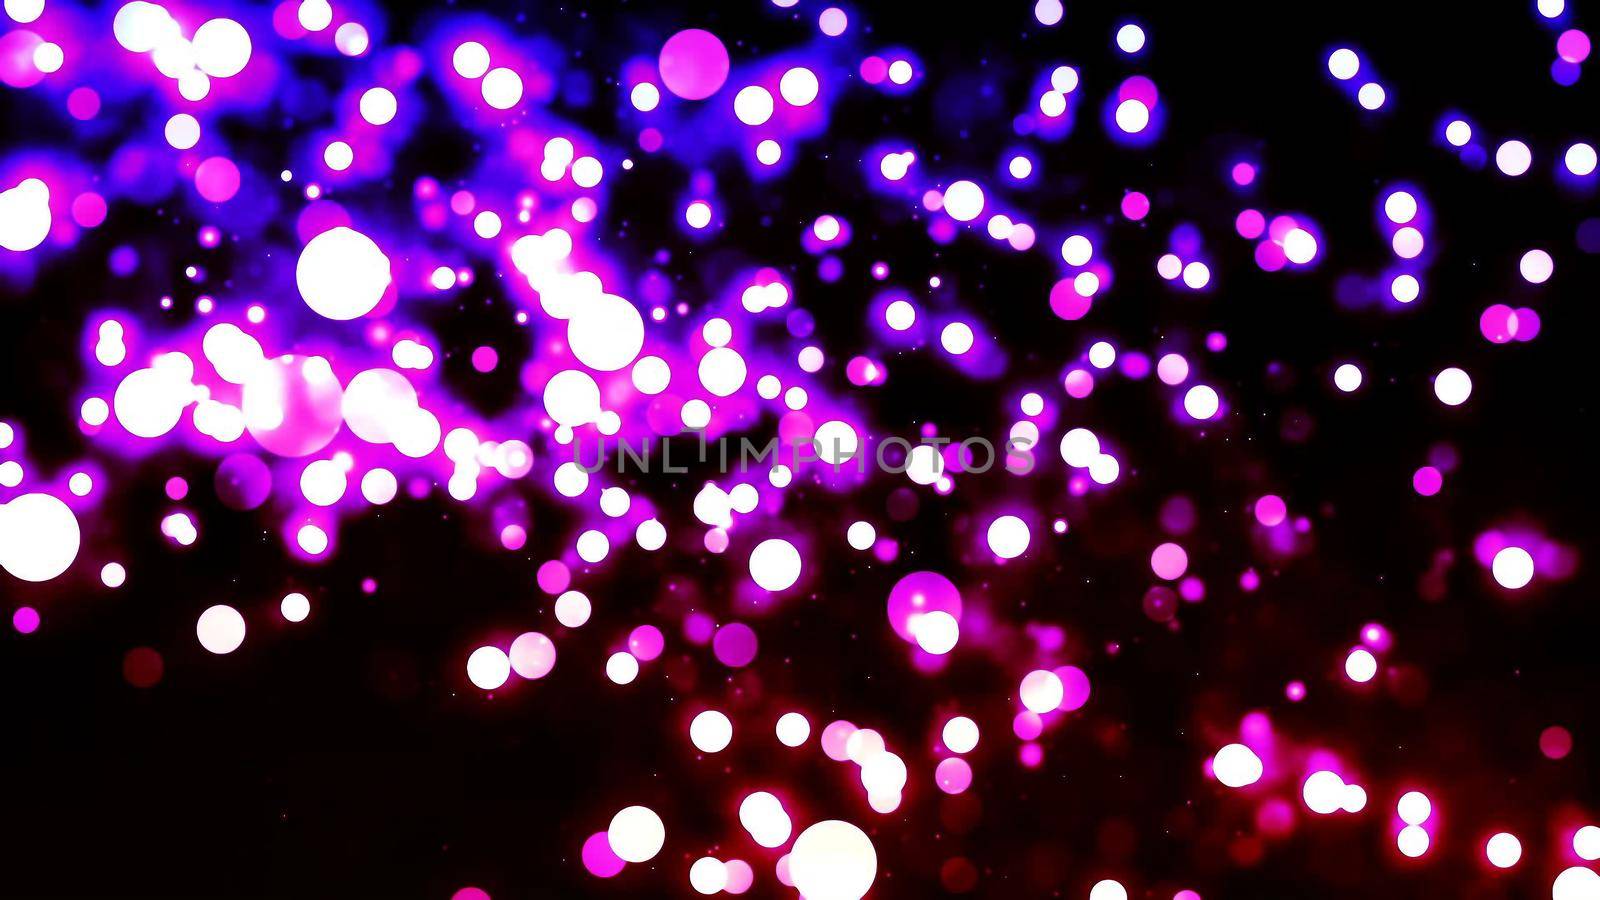 Background with nice purple glowing bokeh 3D rendering by designprojects